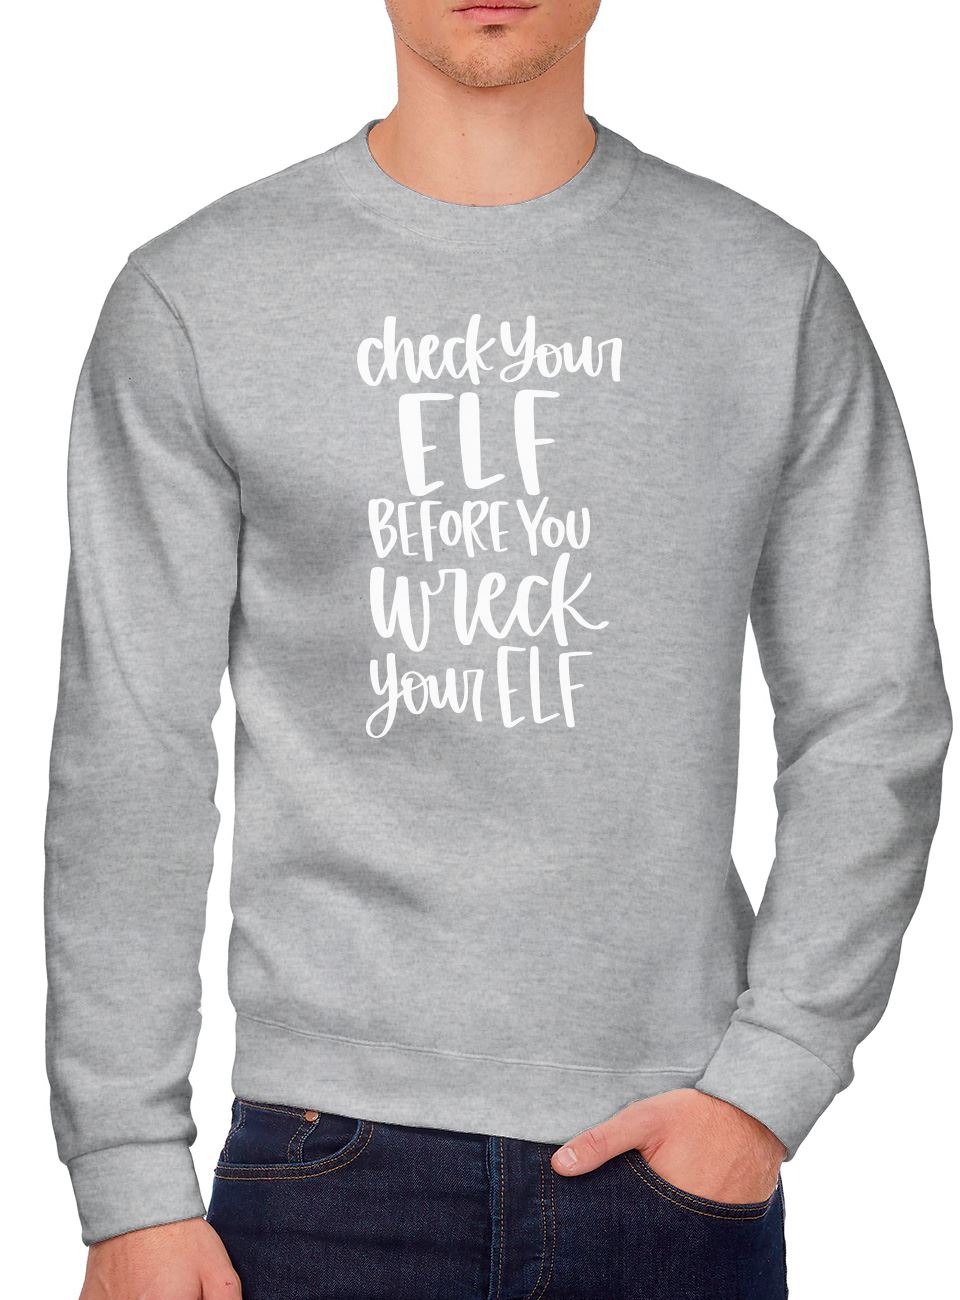 Check Your Elf Before You Wreck Your Elf - Youth & Mens Sweatshirt